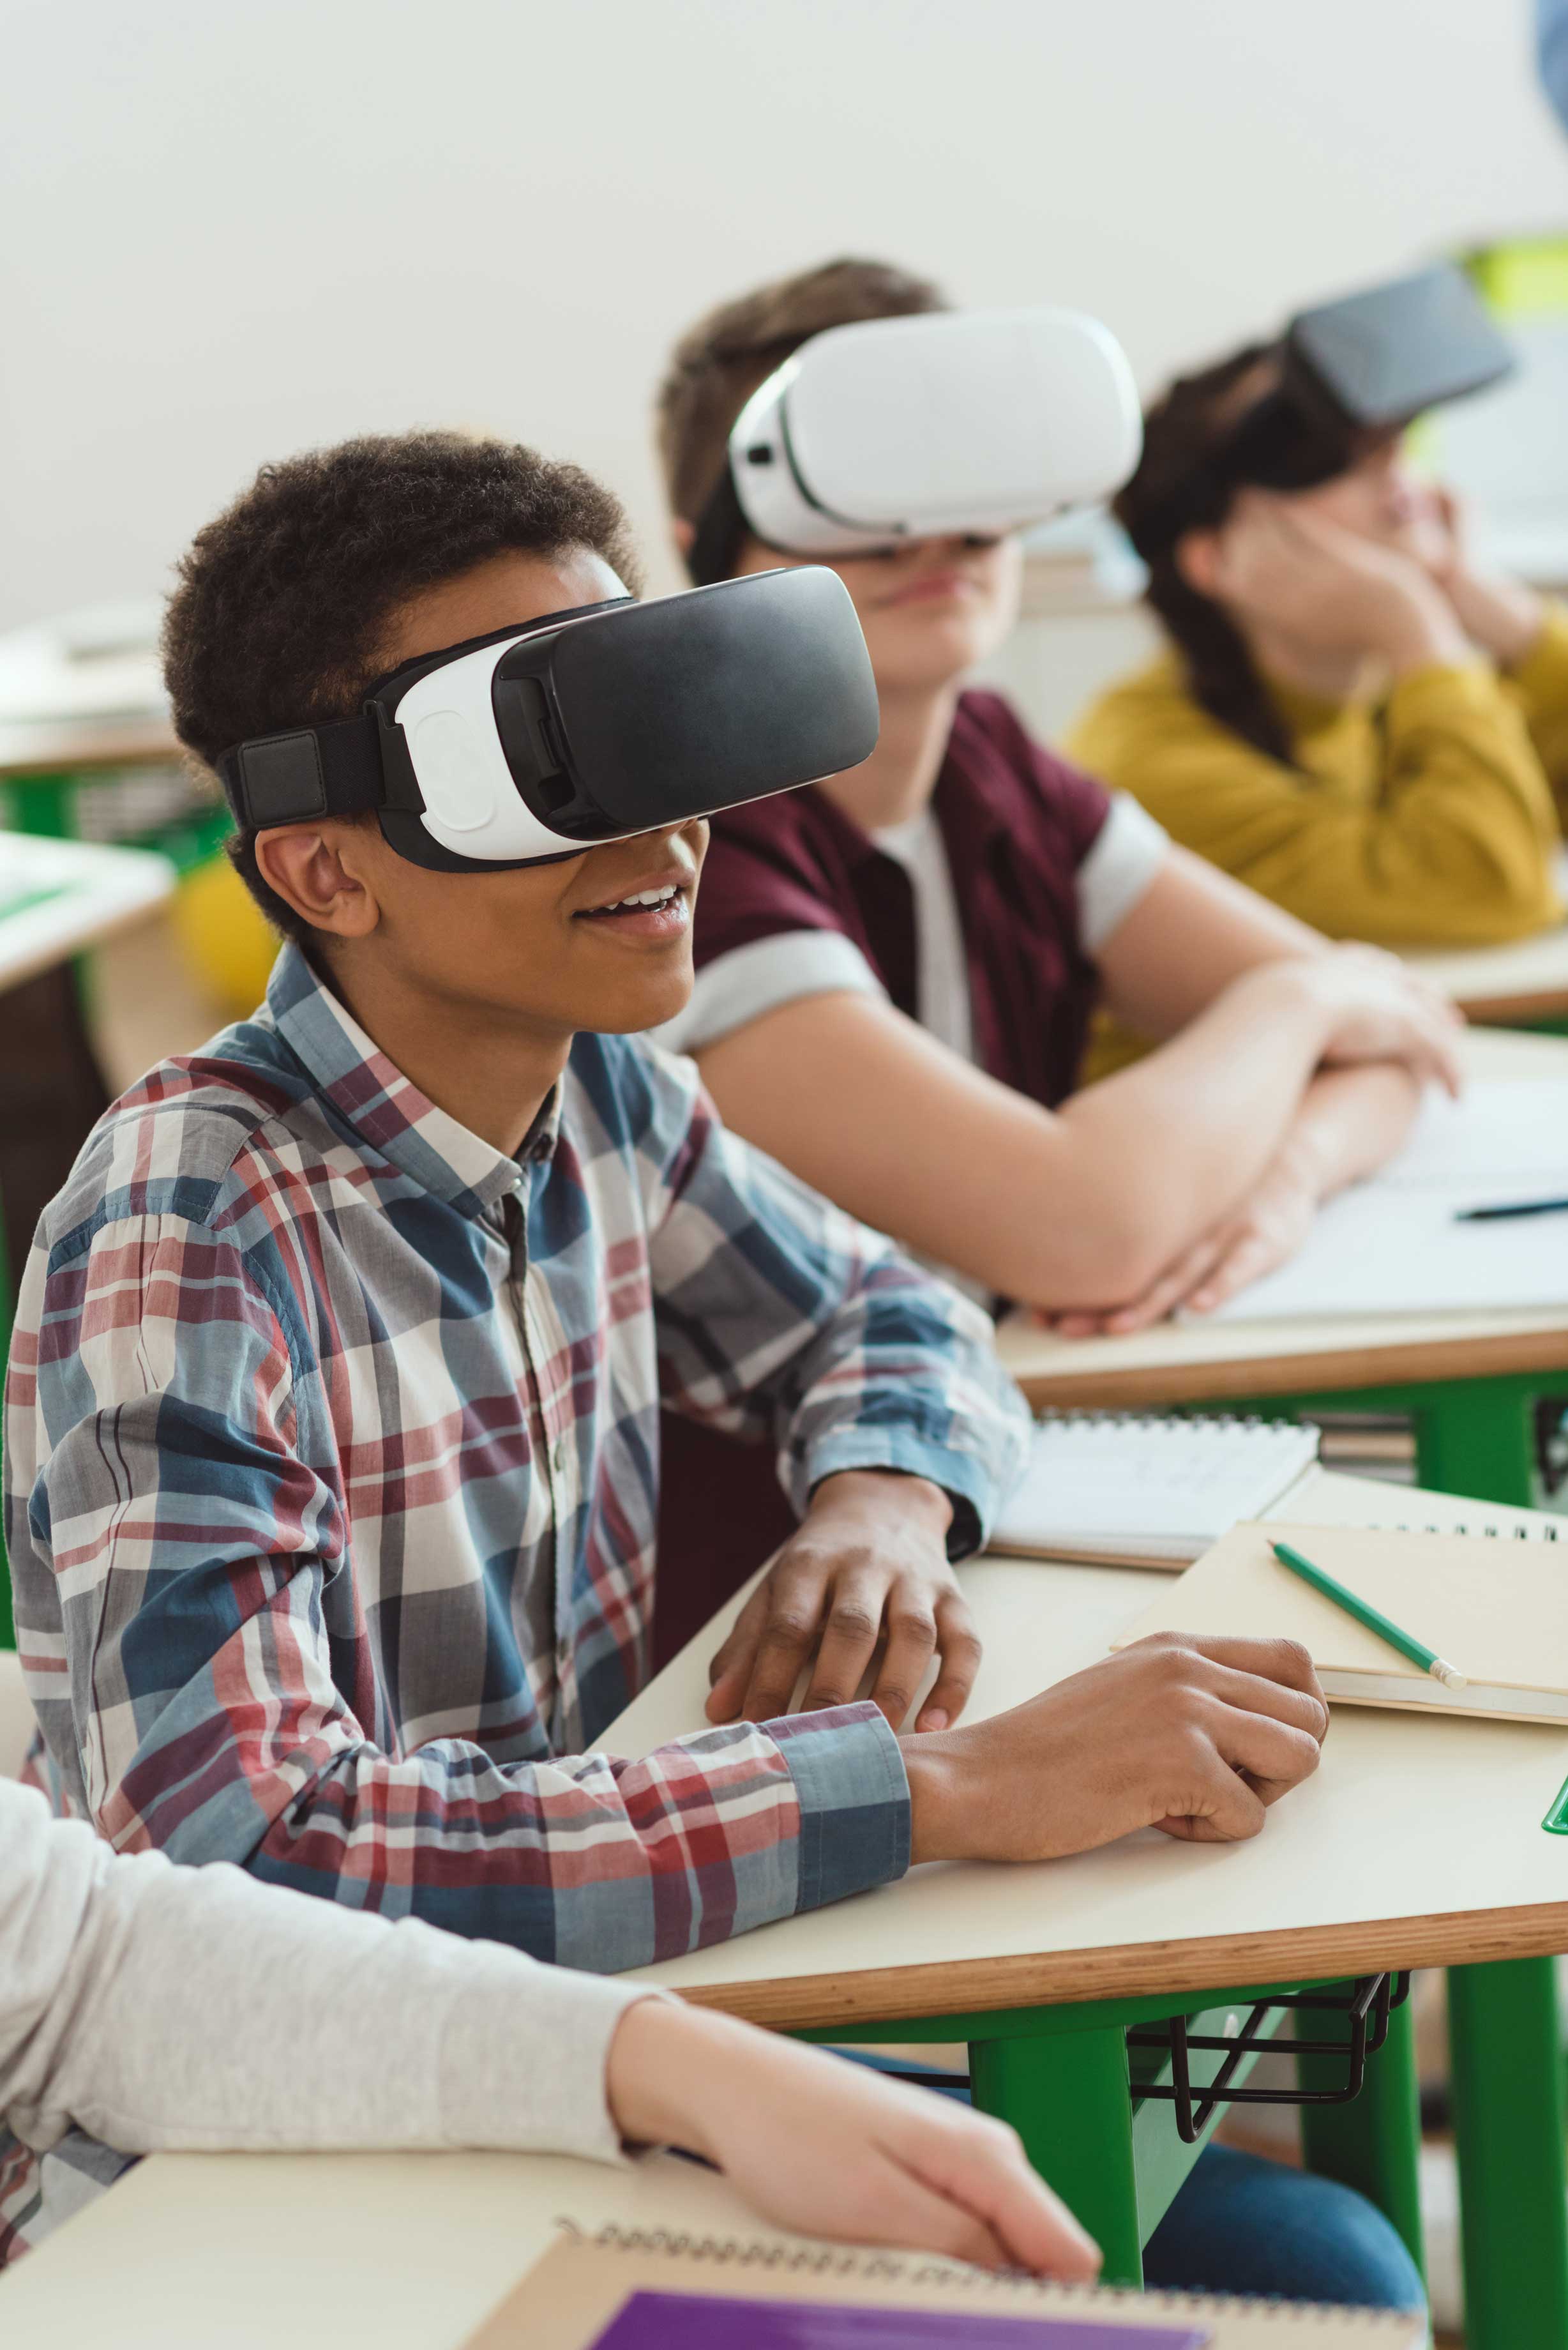 Experied vr virtual reality education tools best vr education products how to use vr to inspure kids vr key stage education materials virtual reality key stage education materials that use vr